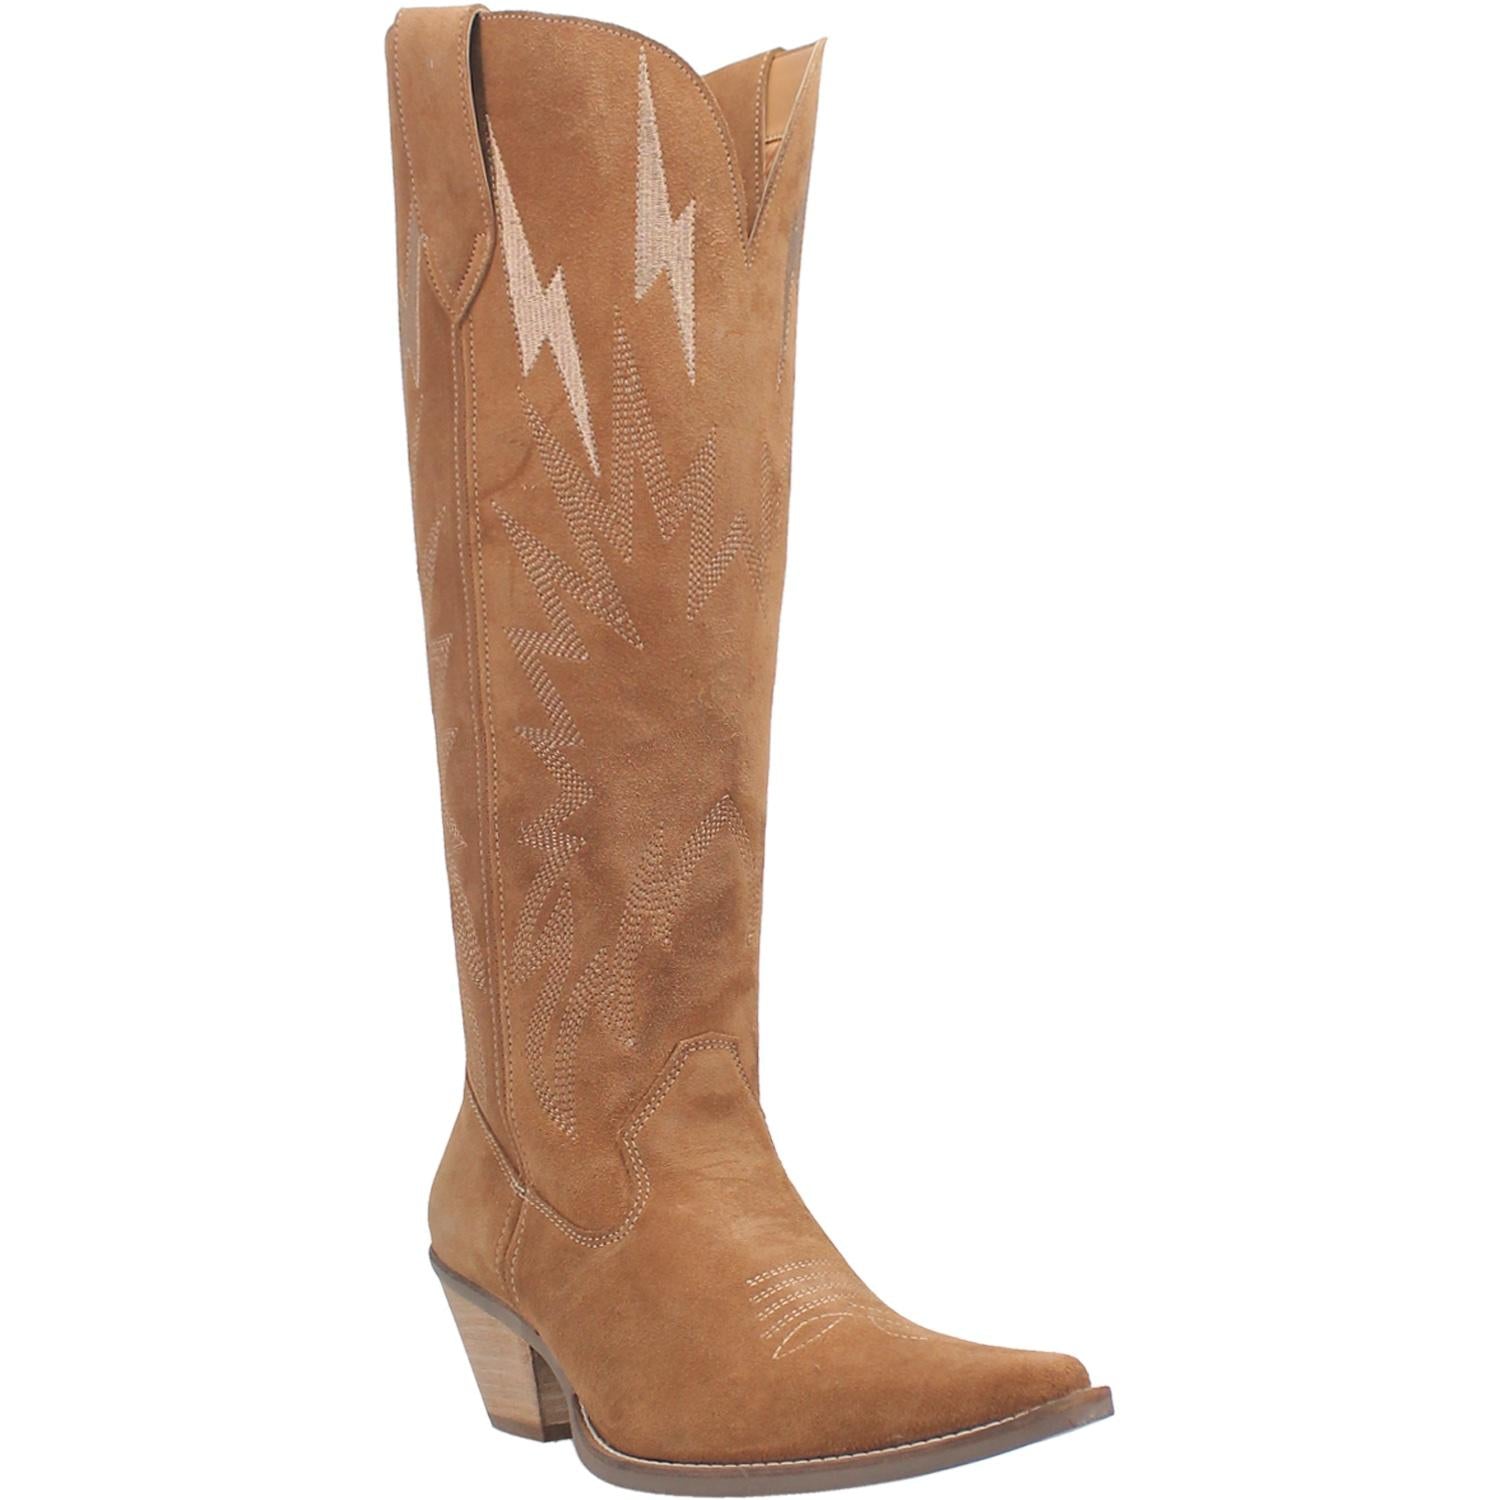 A tall brown boot featuring rhinestone lightning designs, small heel, leather straps, and a V cut at the top. Item is pictured on a plain white background